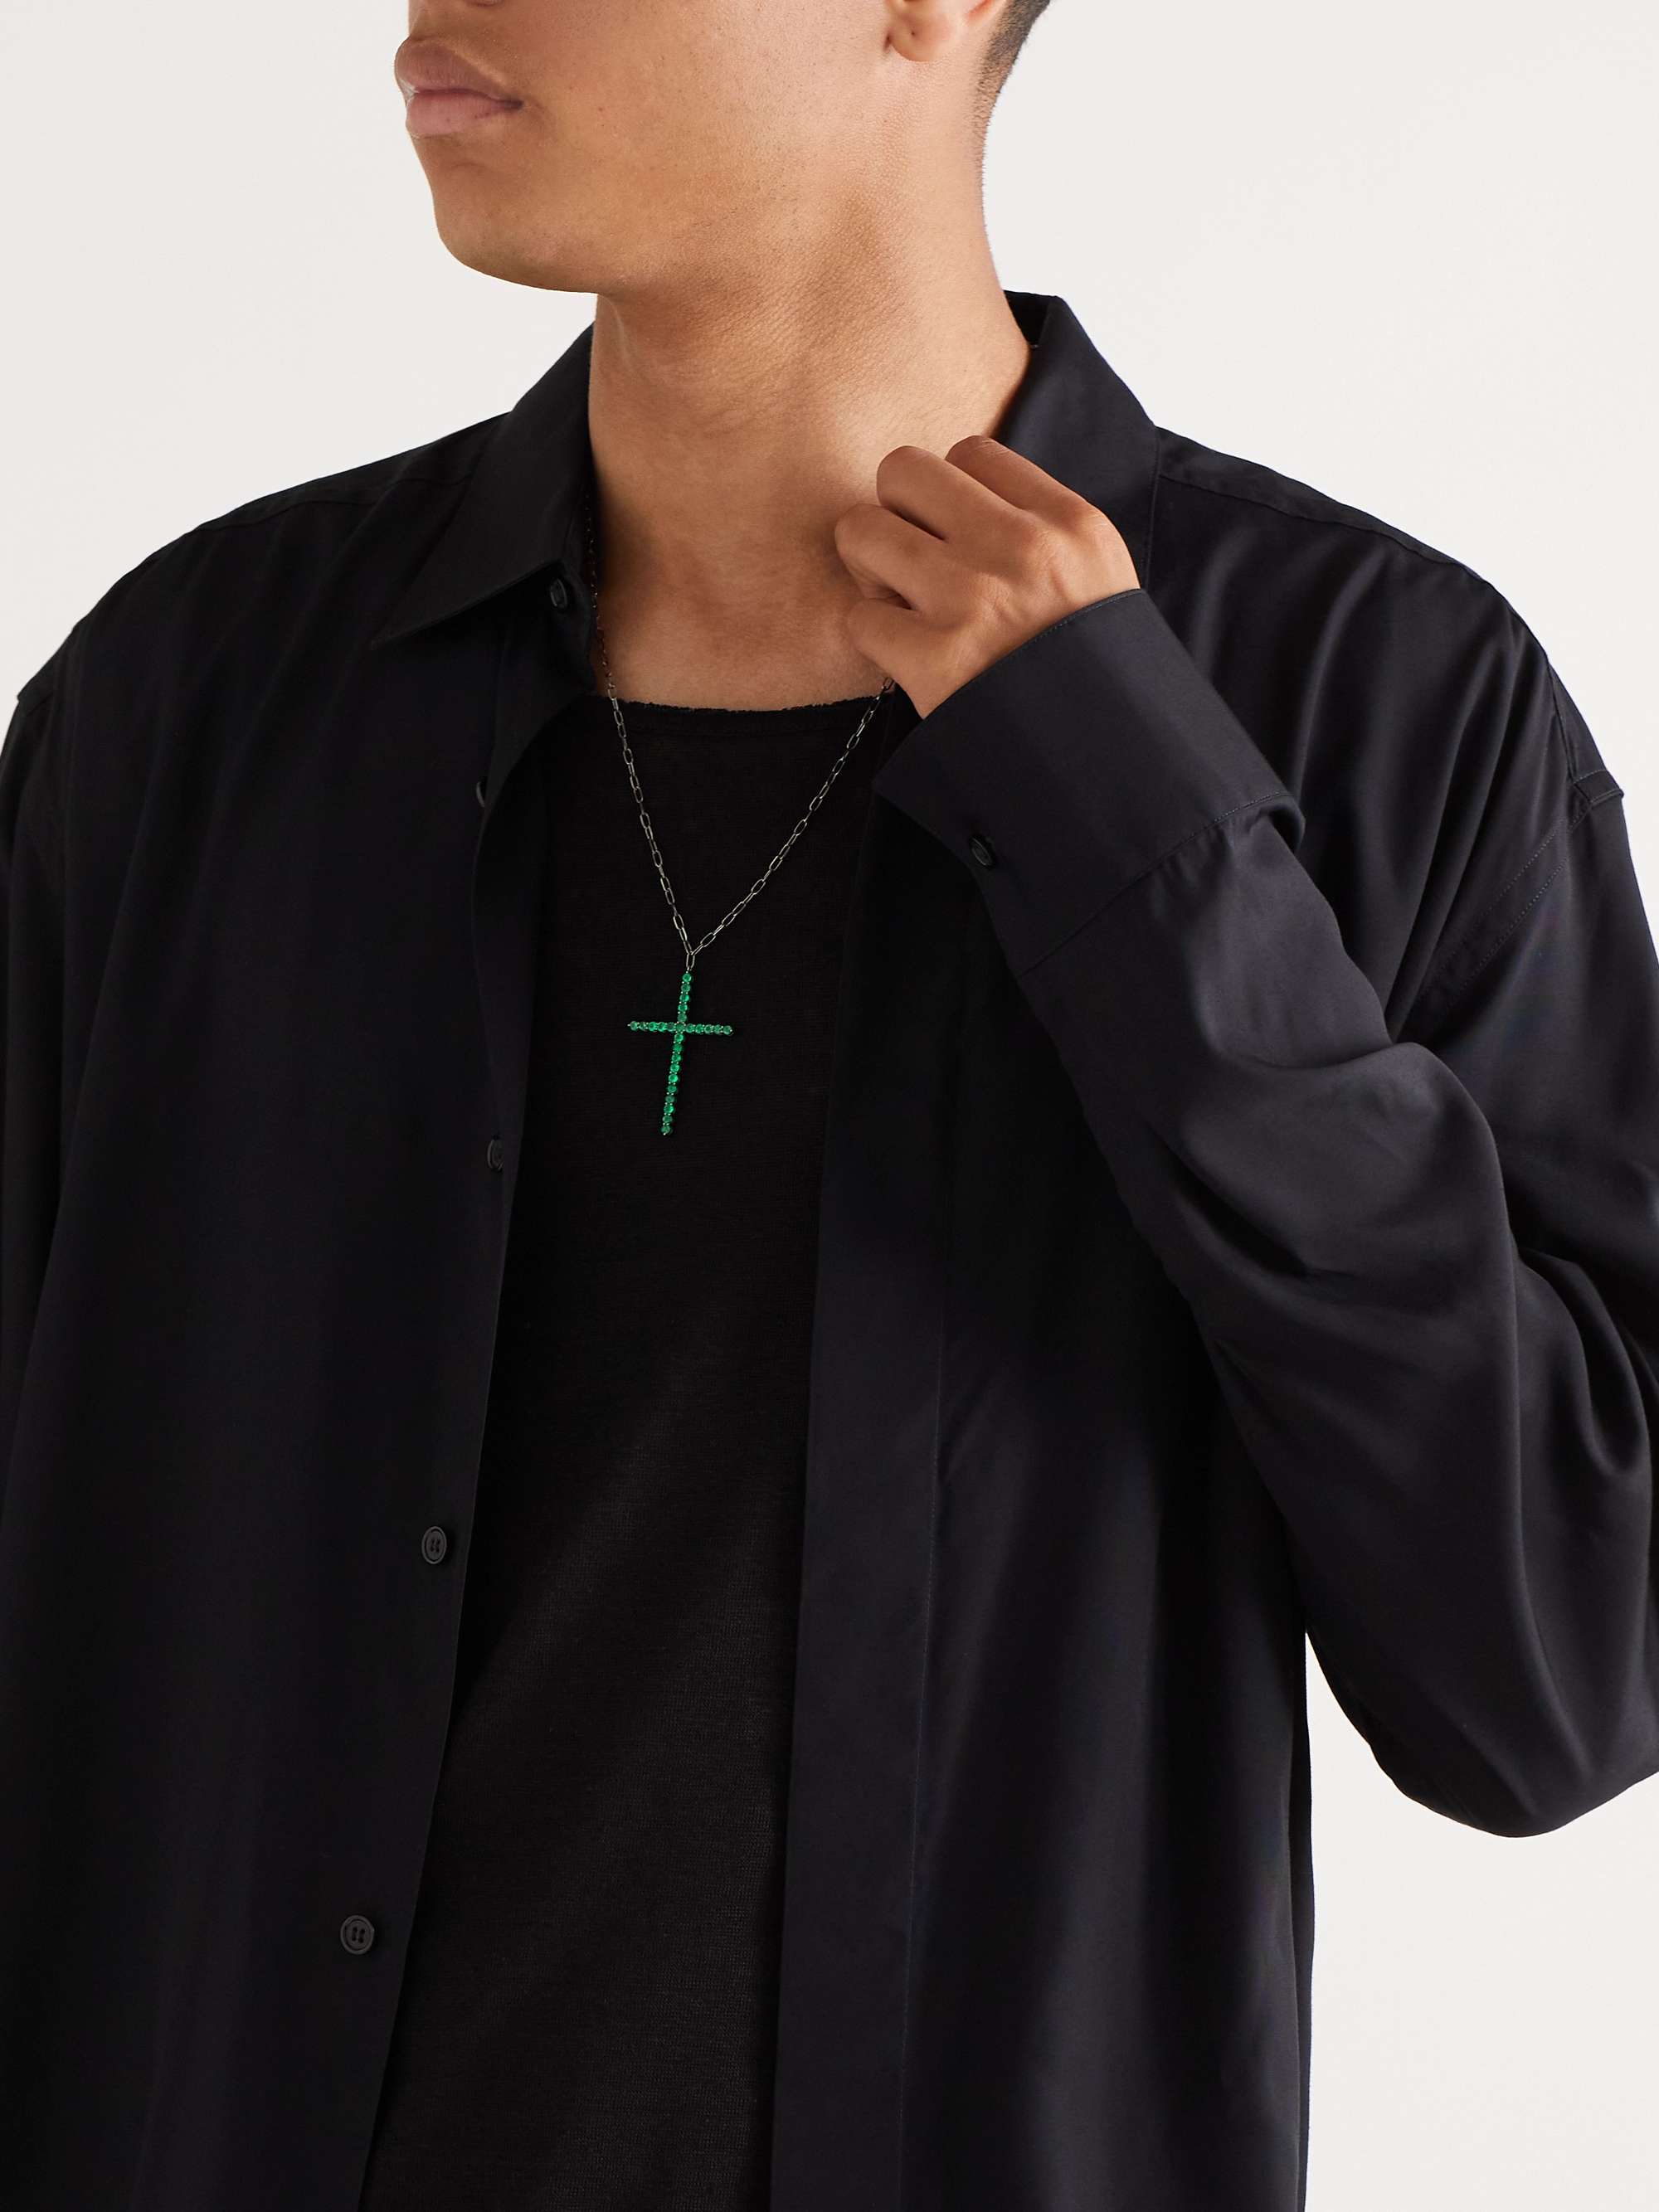 SHAY Black Gold Emerald Cross Necklace